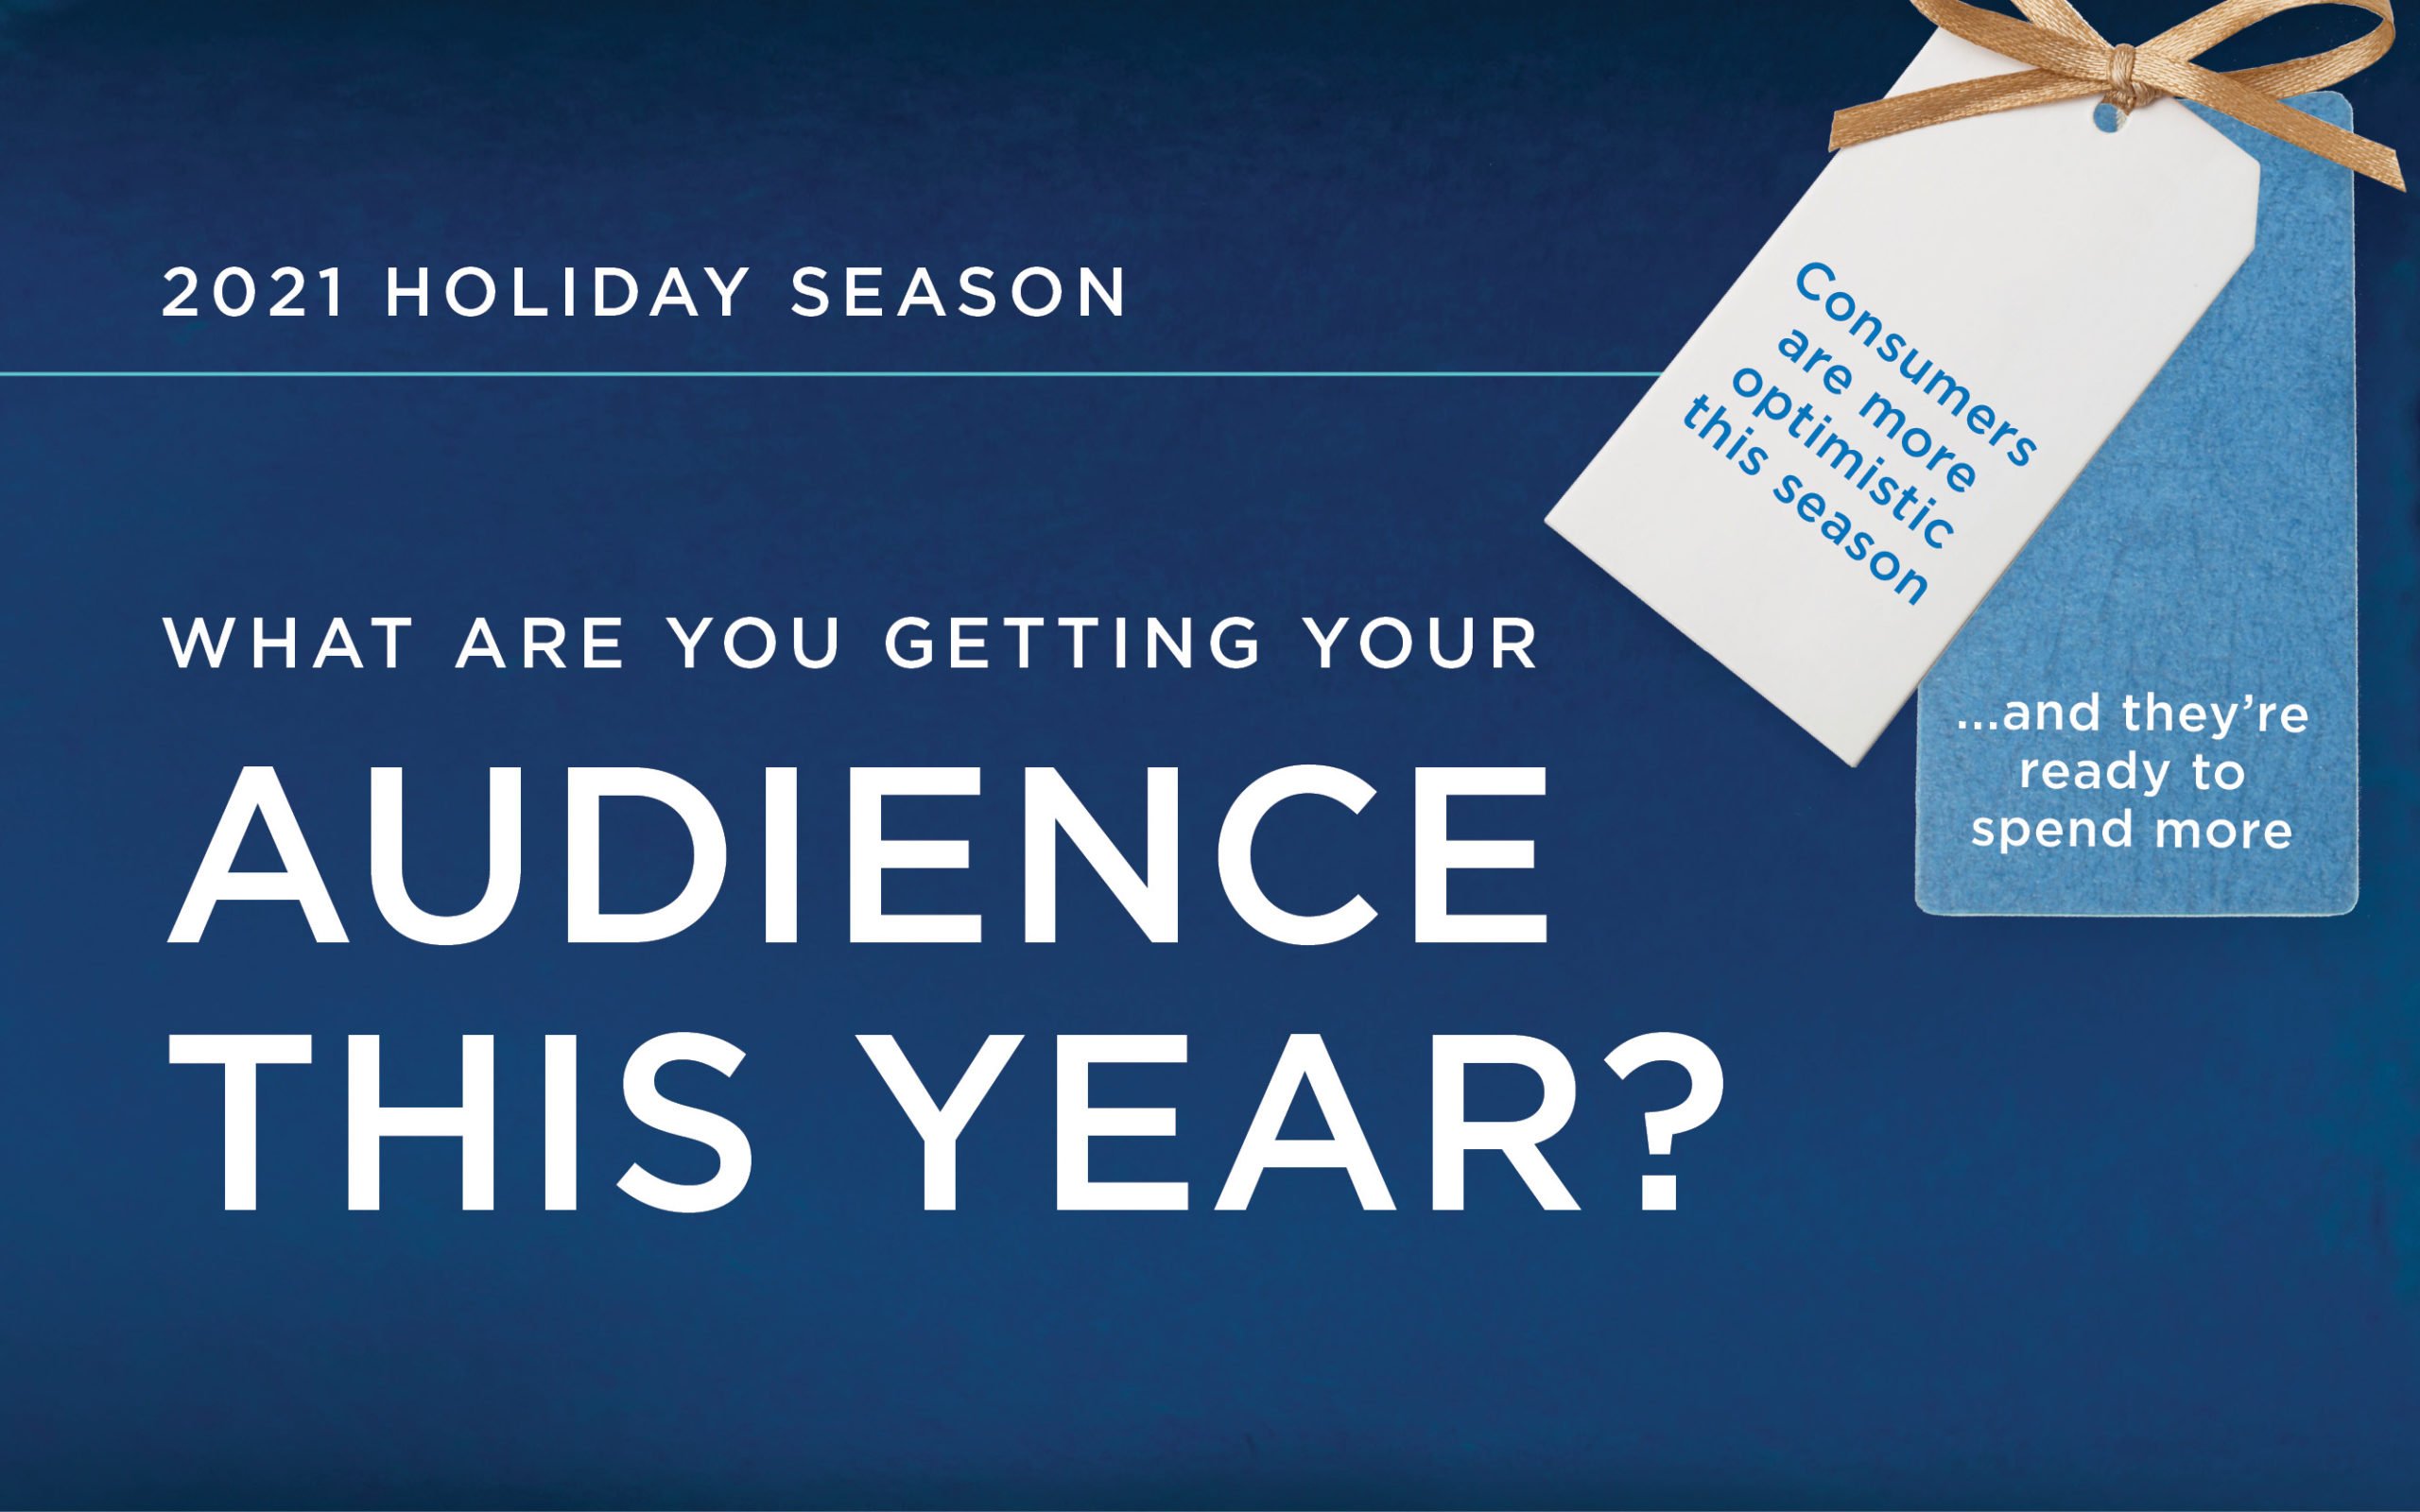 What will you give your audience this year?